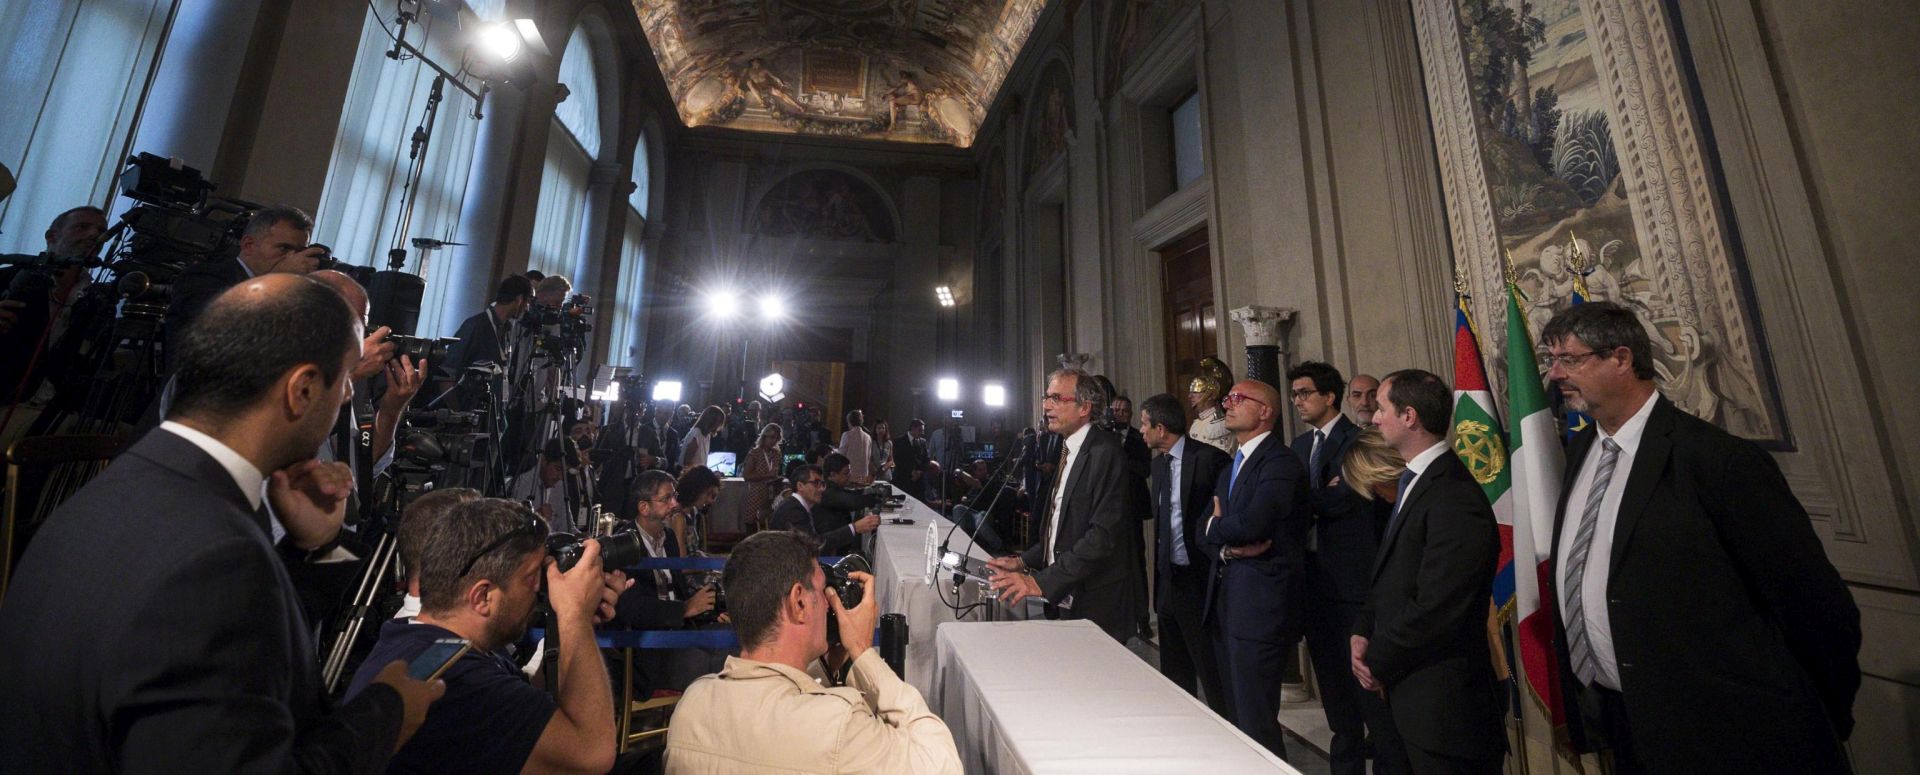 epa07797751 Gruppo Misto (Mixed Group) members of the Chamber of Deputies, arrives to address the media after a meeting with Italian President Sergio Mattarella at the Quirinale Palace for the second round of formal political consultations following the resignation of Prime Minister Giuseppe Conte, in Rome, Italy, 27 August 2019.  EPA/ANGELO CARCONI